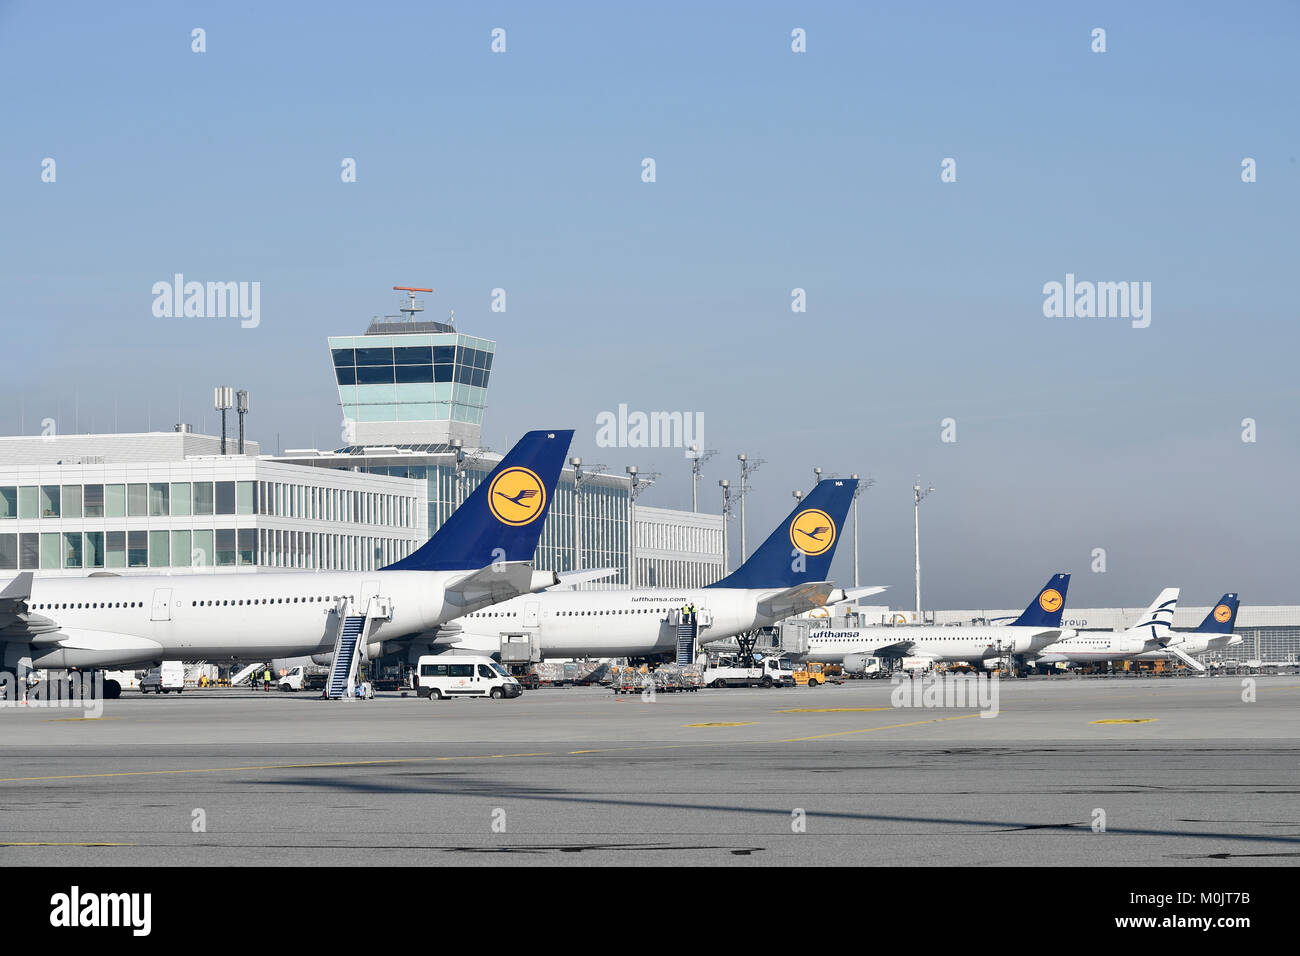 Aircraft Airline Lufthansa and Aegean, Terminal 2, Apron East, Satellite, Terminal 2, Munich Airport, Upper Bavaria, Germany Stock Photo